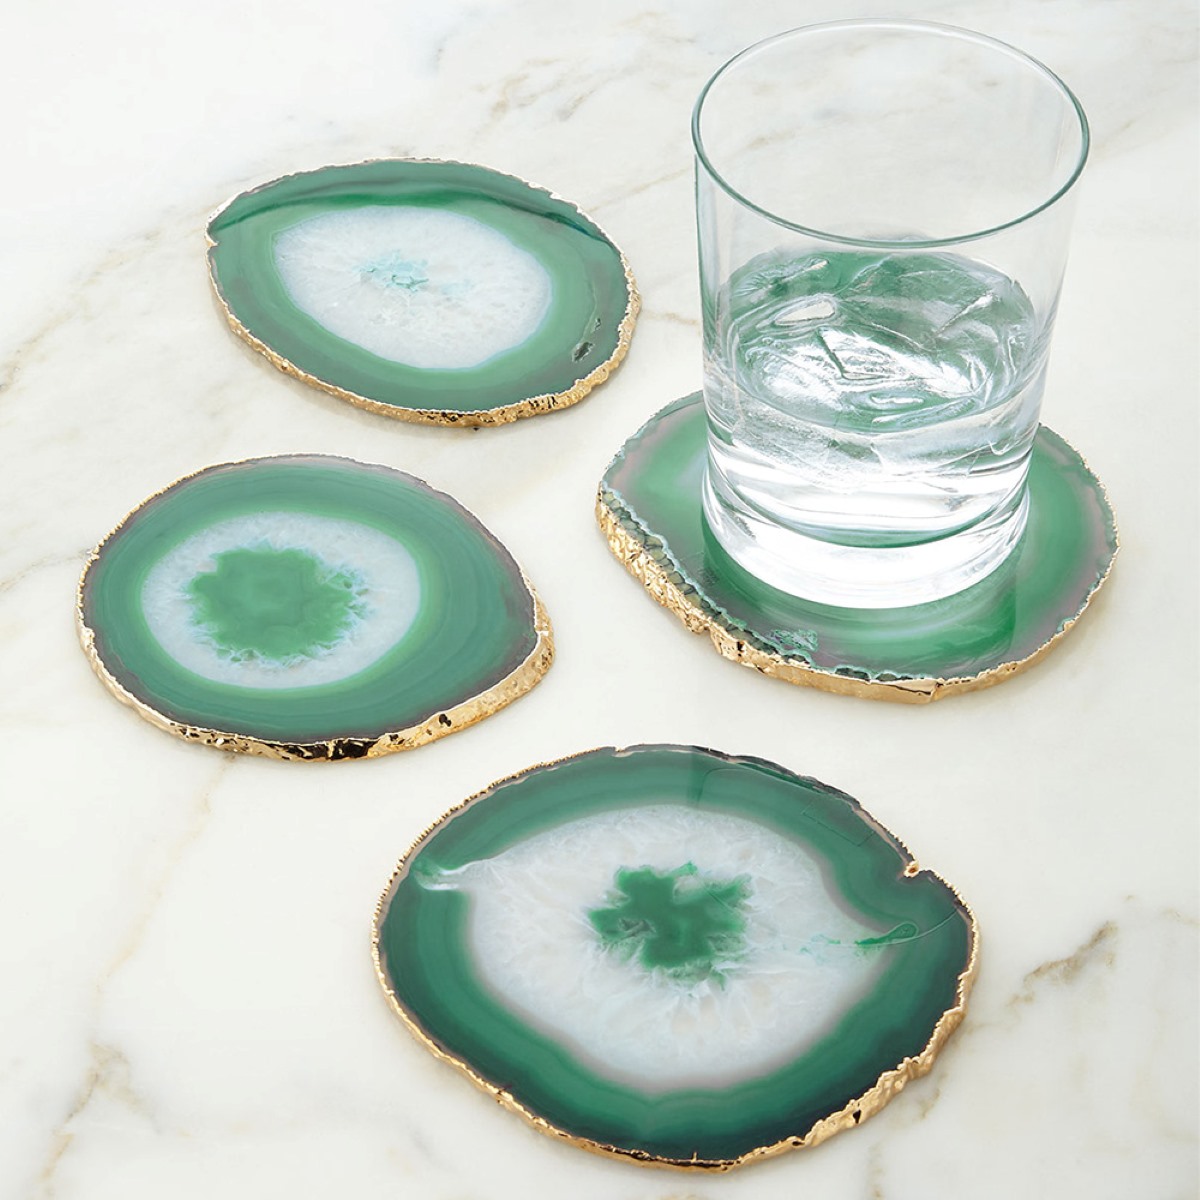 How To Clean Stone Coasters